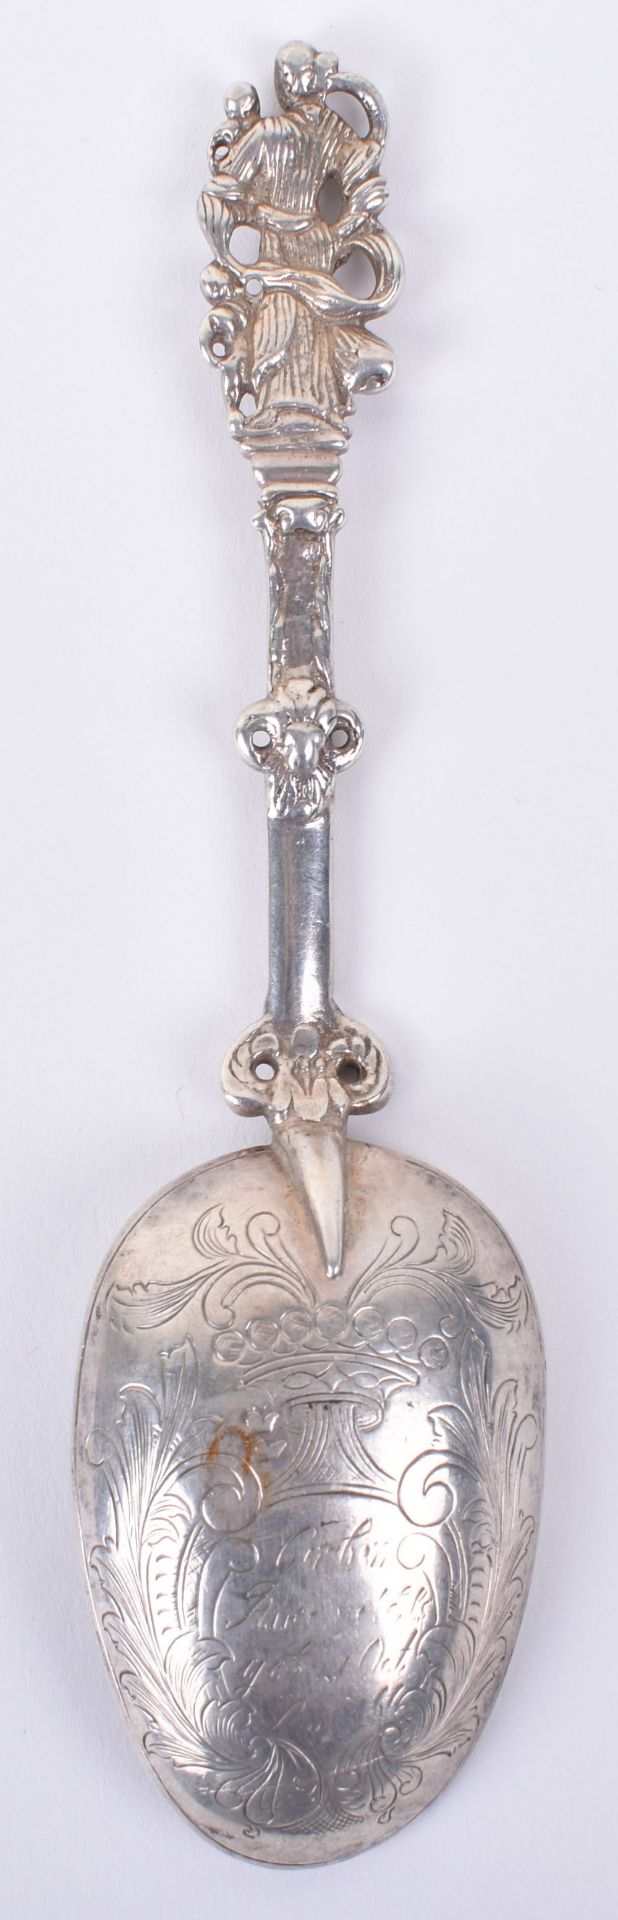 An 18th century Dutch silver spoon, marked 1766 - Image 4 of 7